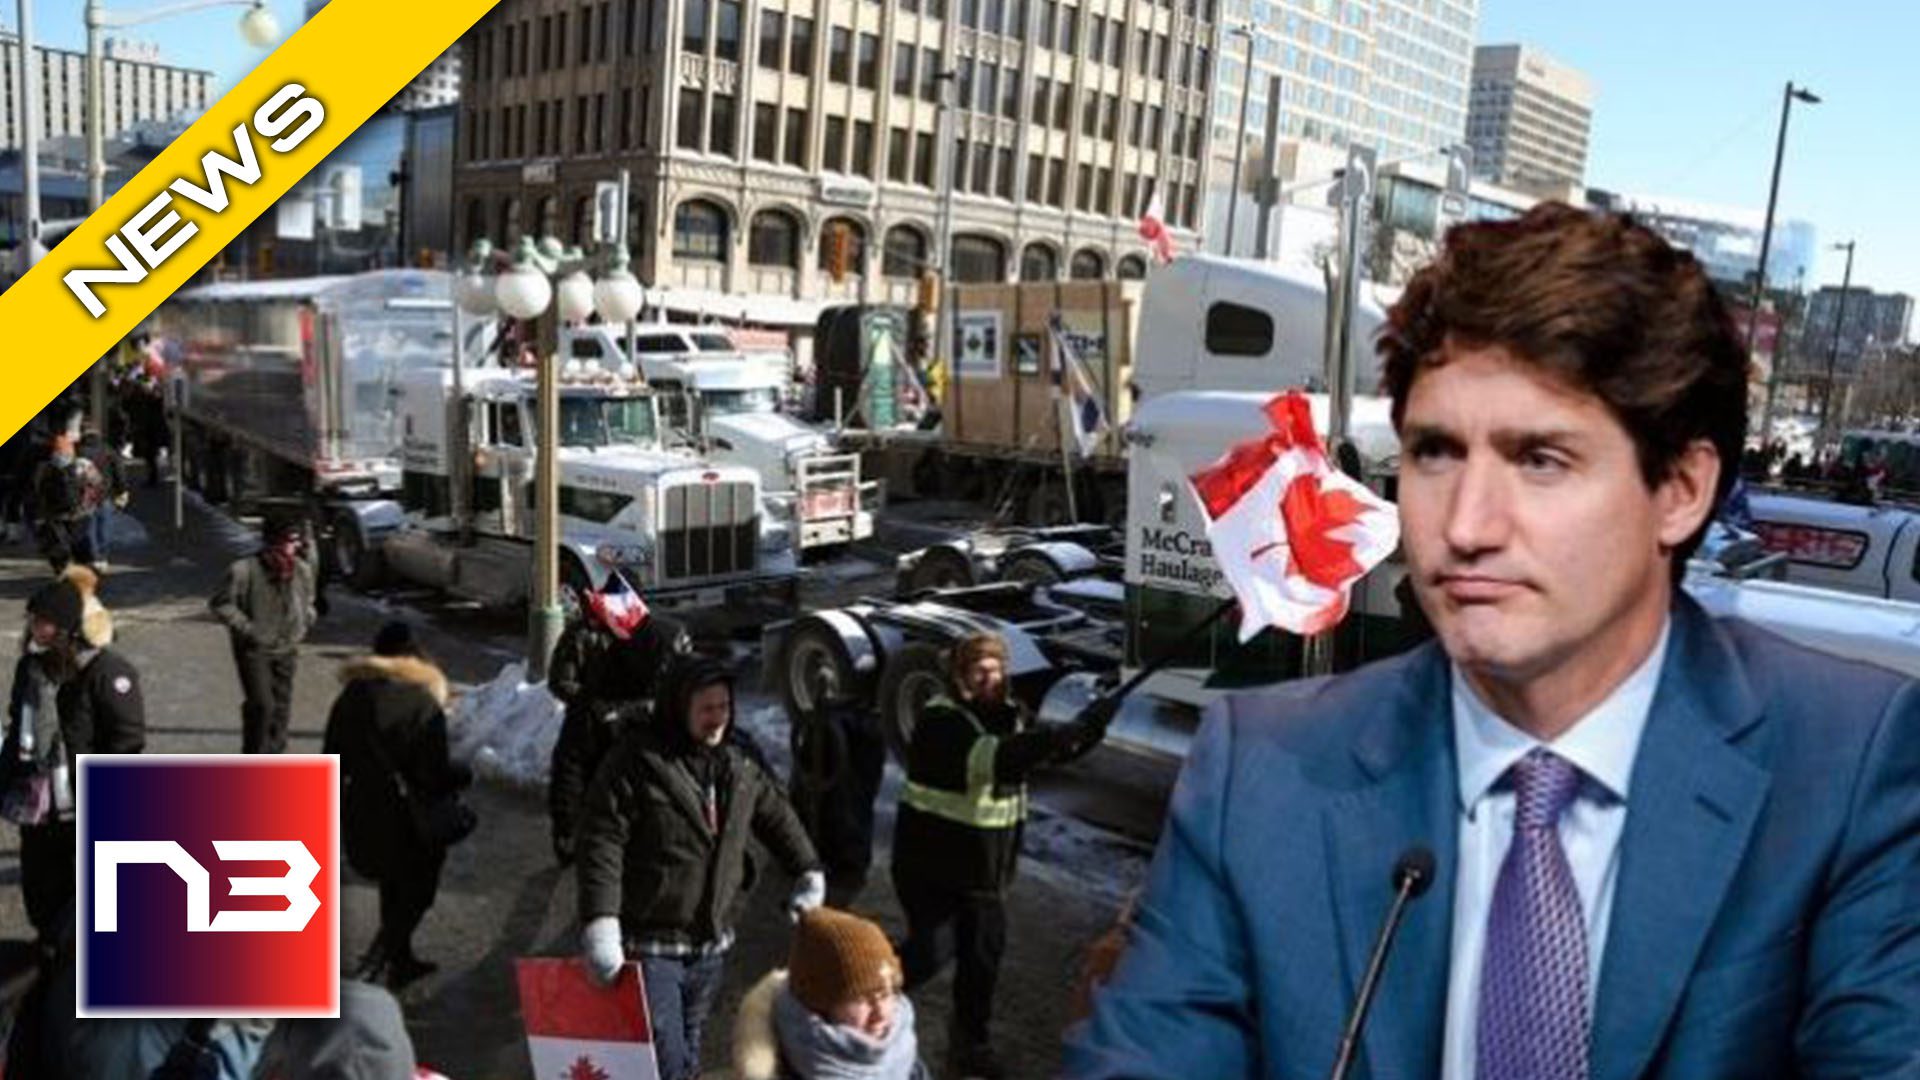 Trudeau's plans to accelerate green policies will destroy Canada!